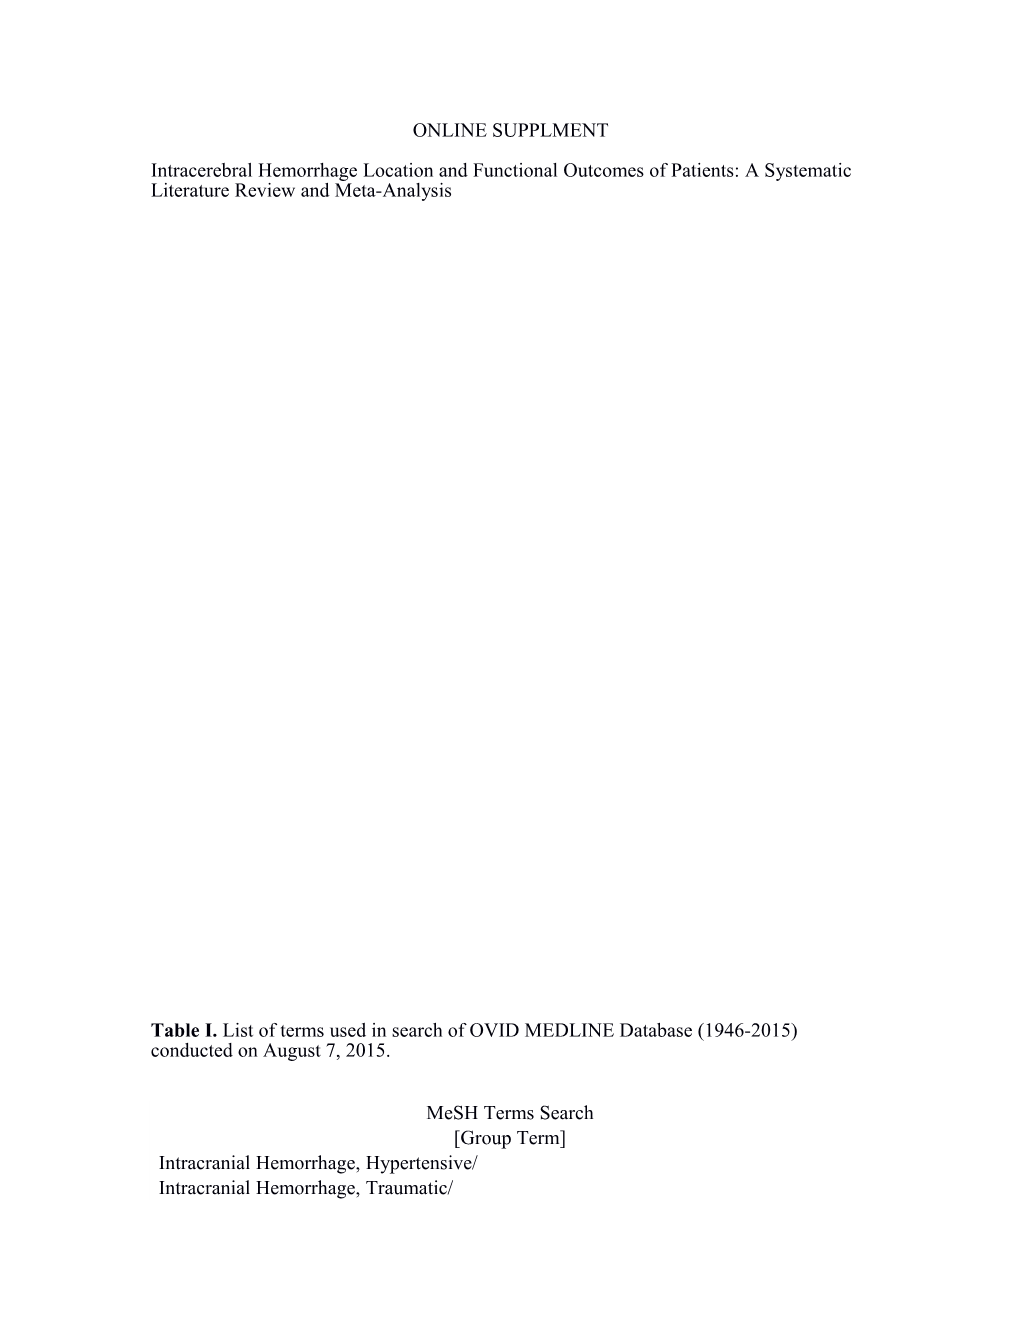 Table II. Information Abstracted from Individual Studies in the Final Literature Review